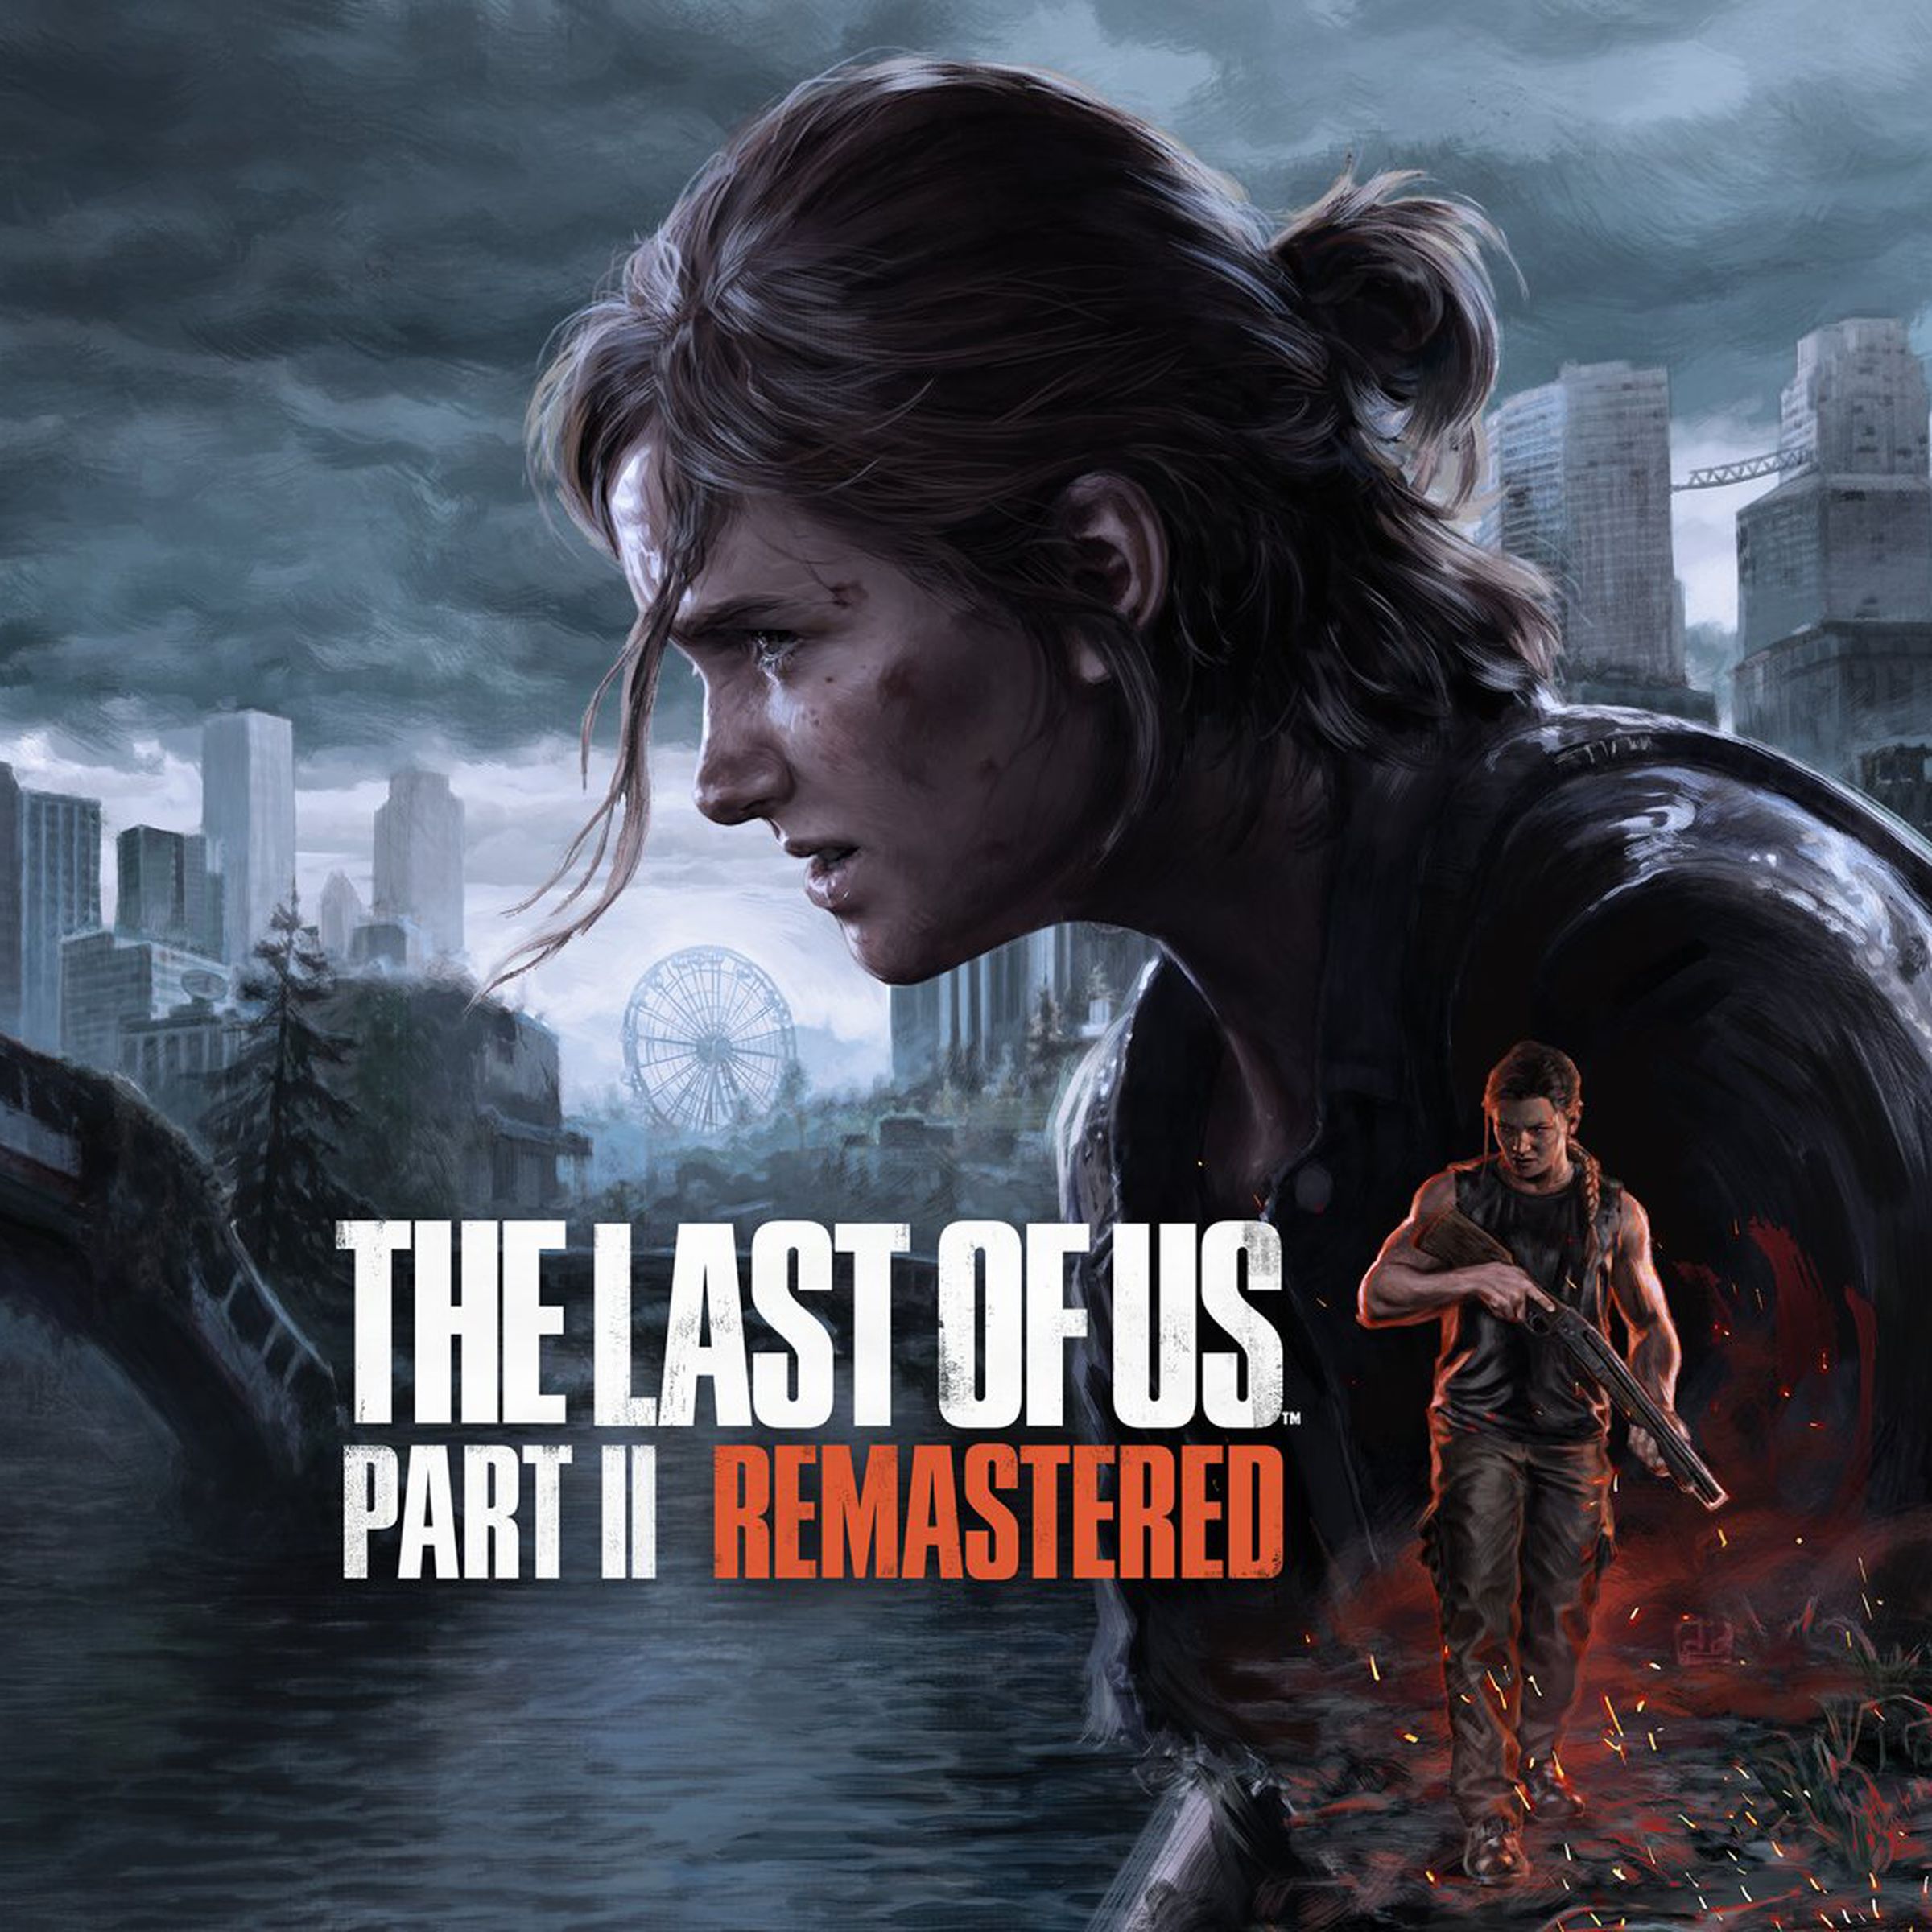 The Last of Us Part II Remastered promotional artwork showing Ellie against a post-apocalyptic background.